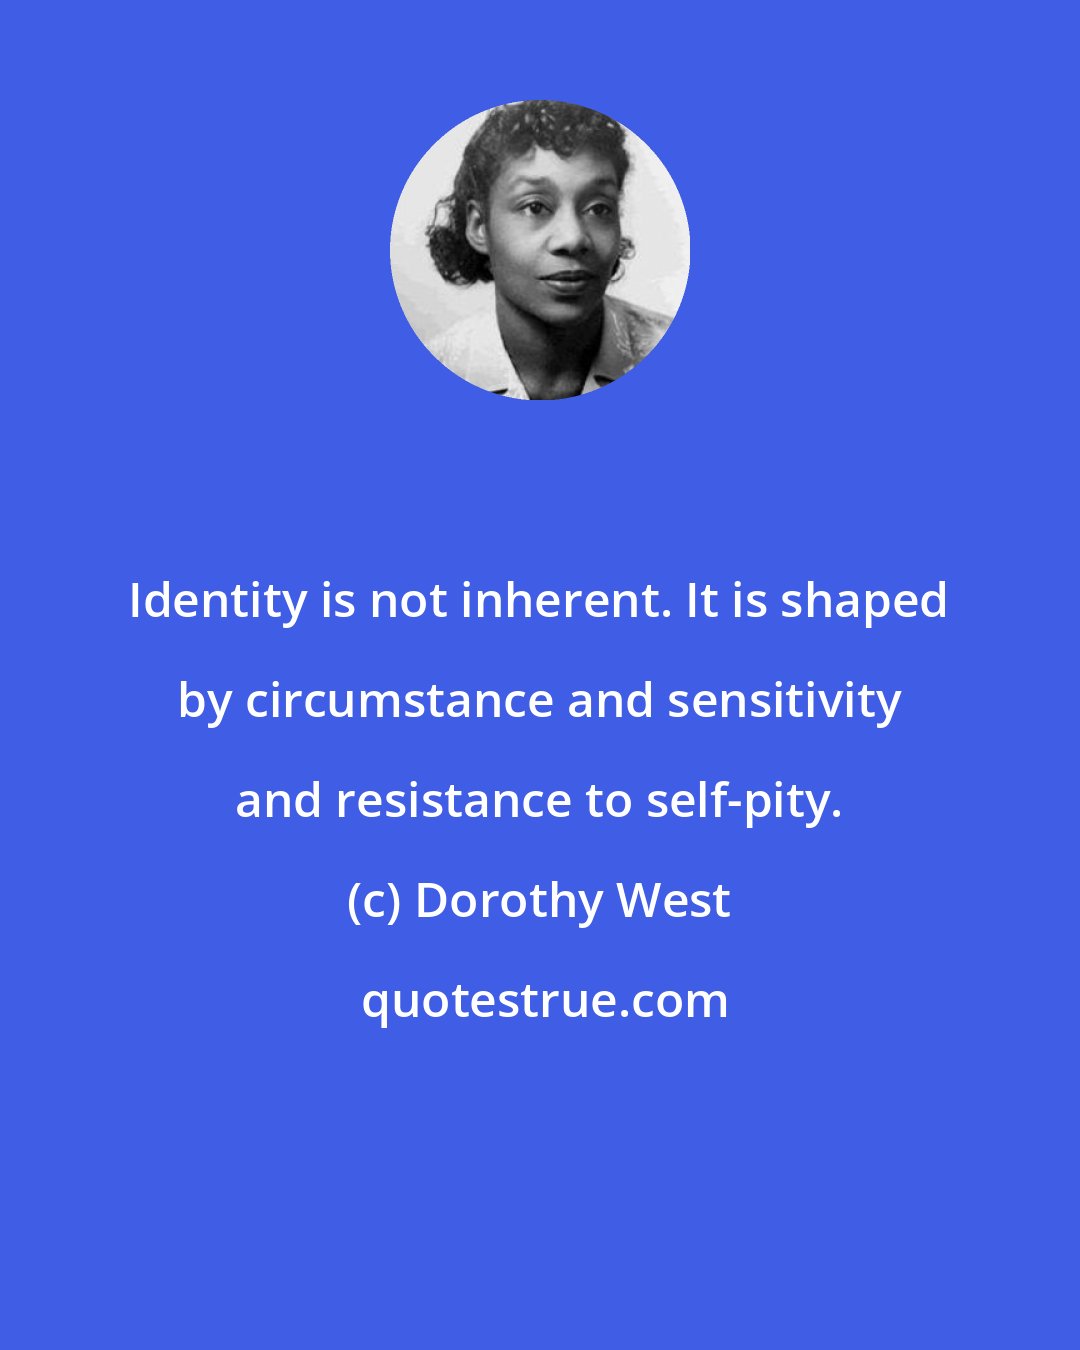 Dorothy West: Identity is not inherent. It is shaped by circumstance and sensitivity and resistance to self-pity.